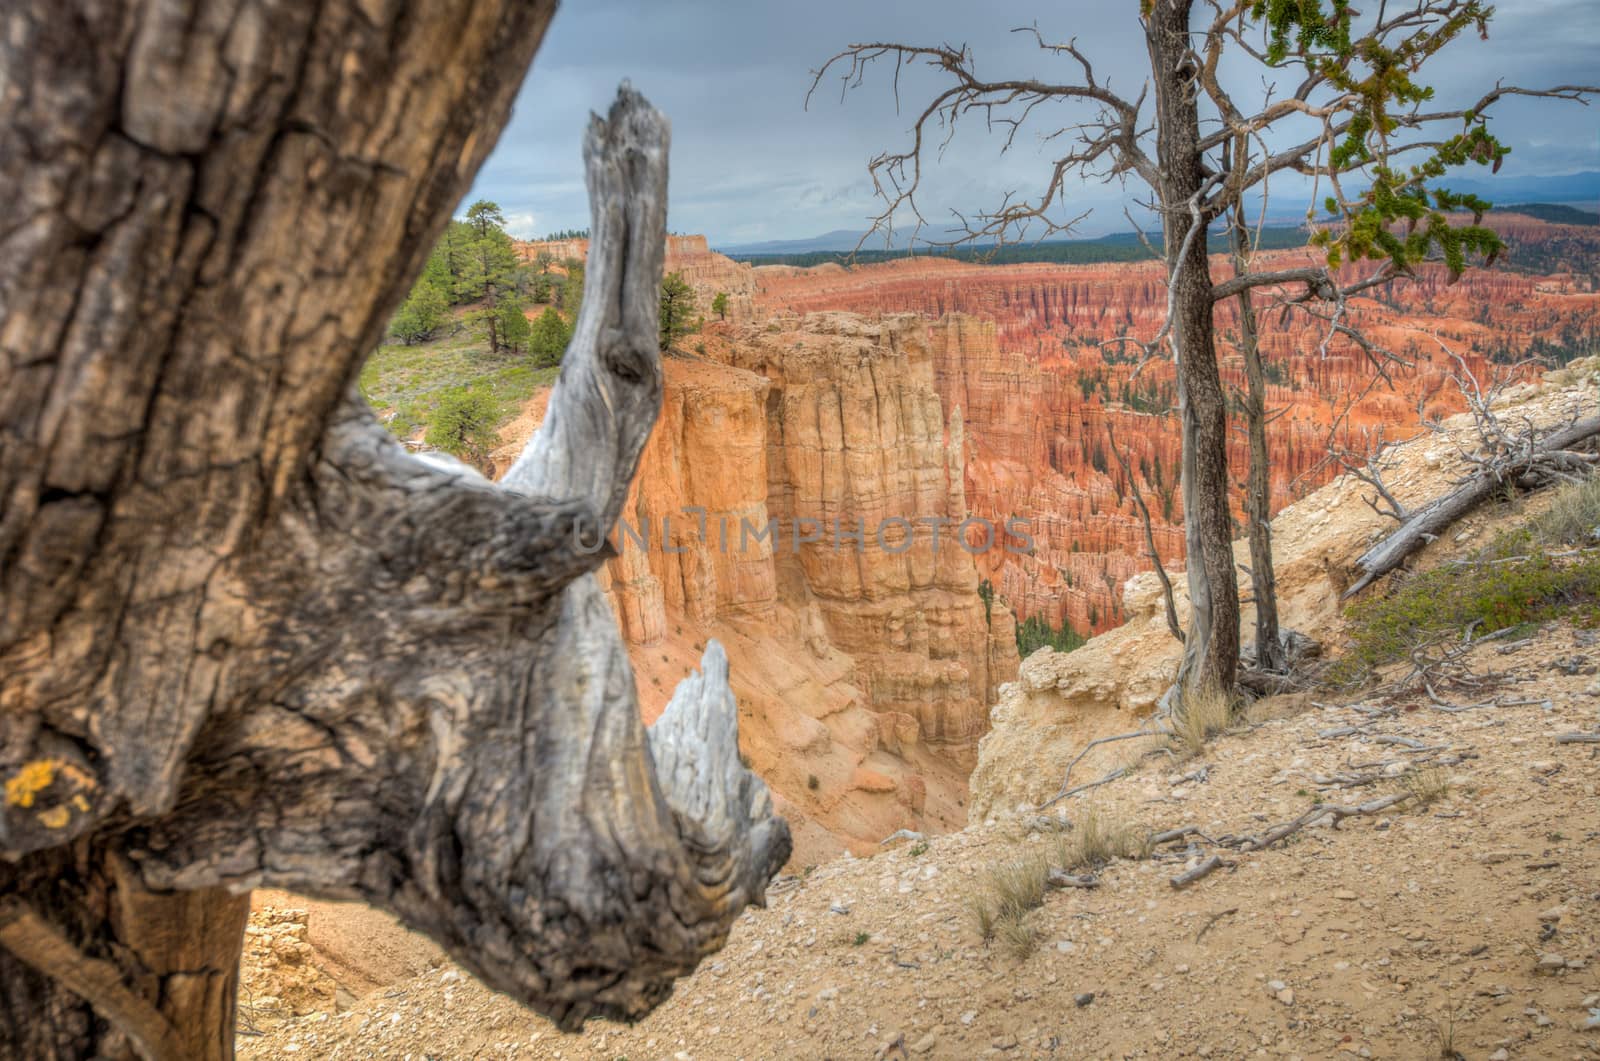 Canyon Bryce wood in foreground amphitheater west USA utah 2013